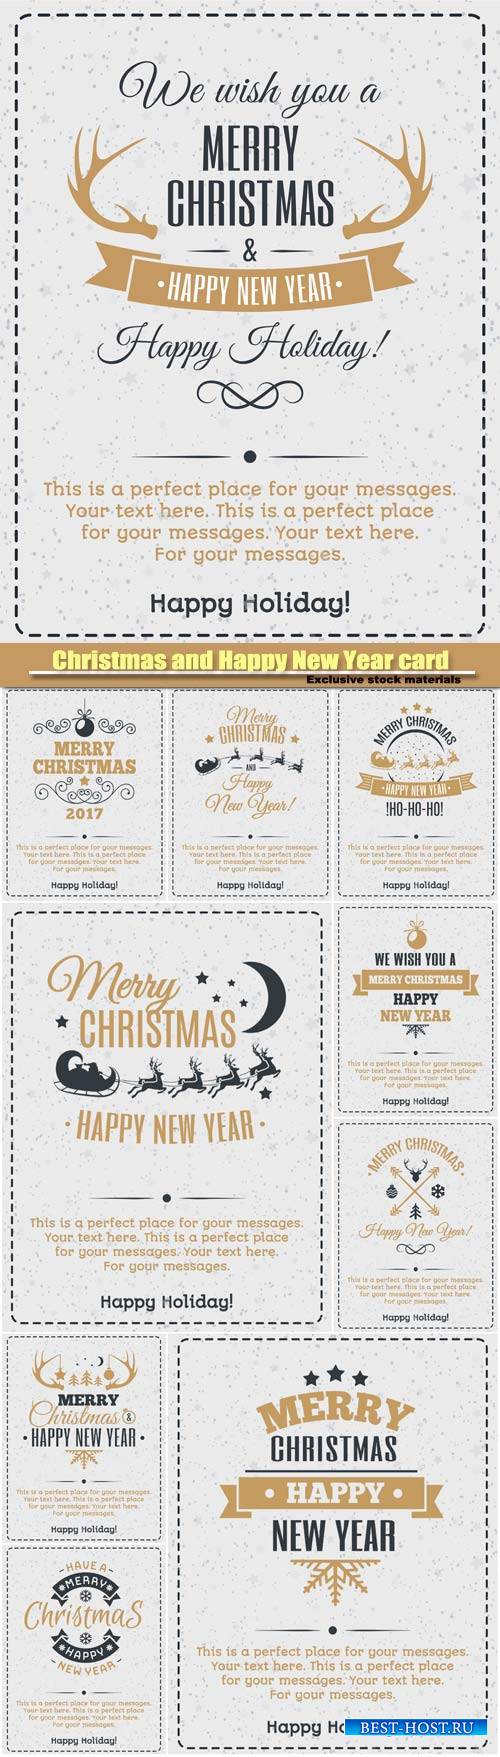 Christmas and Happy New Year card, gold color style, vintage christmas labe ...